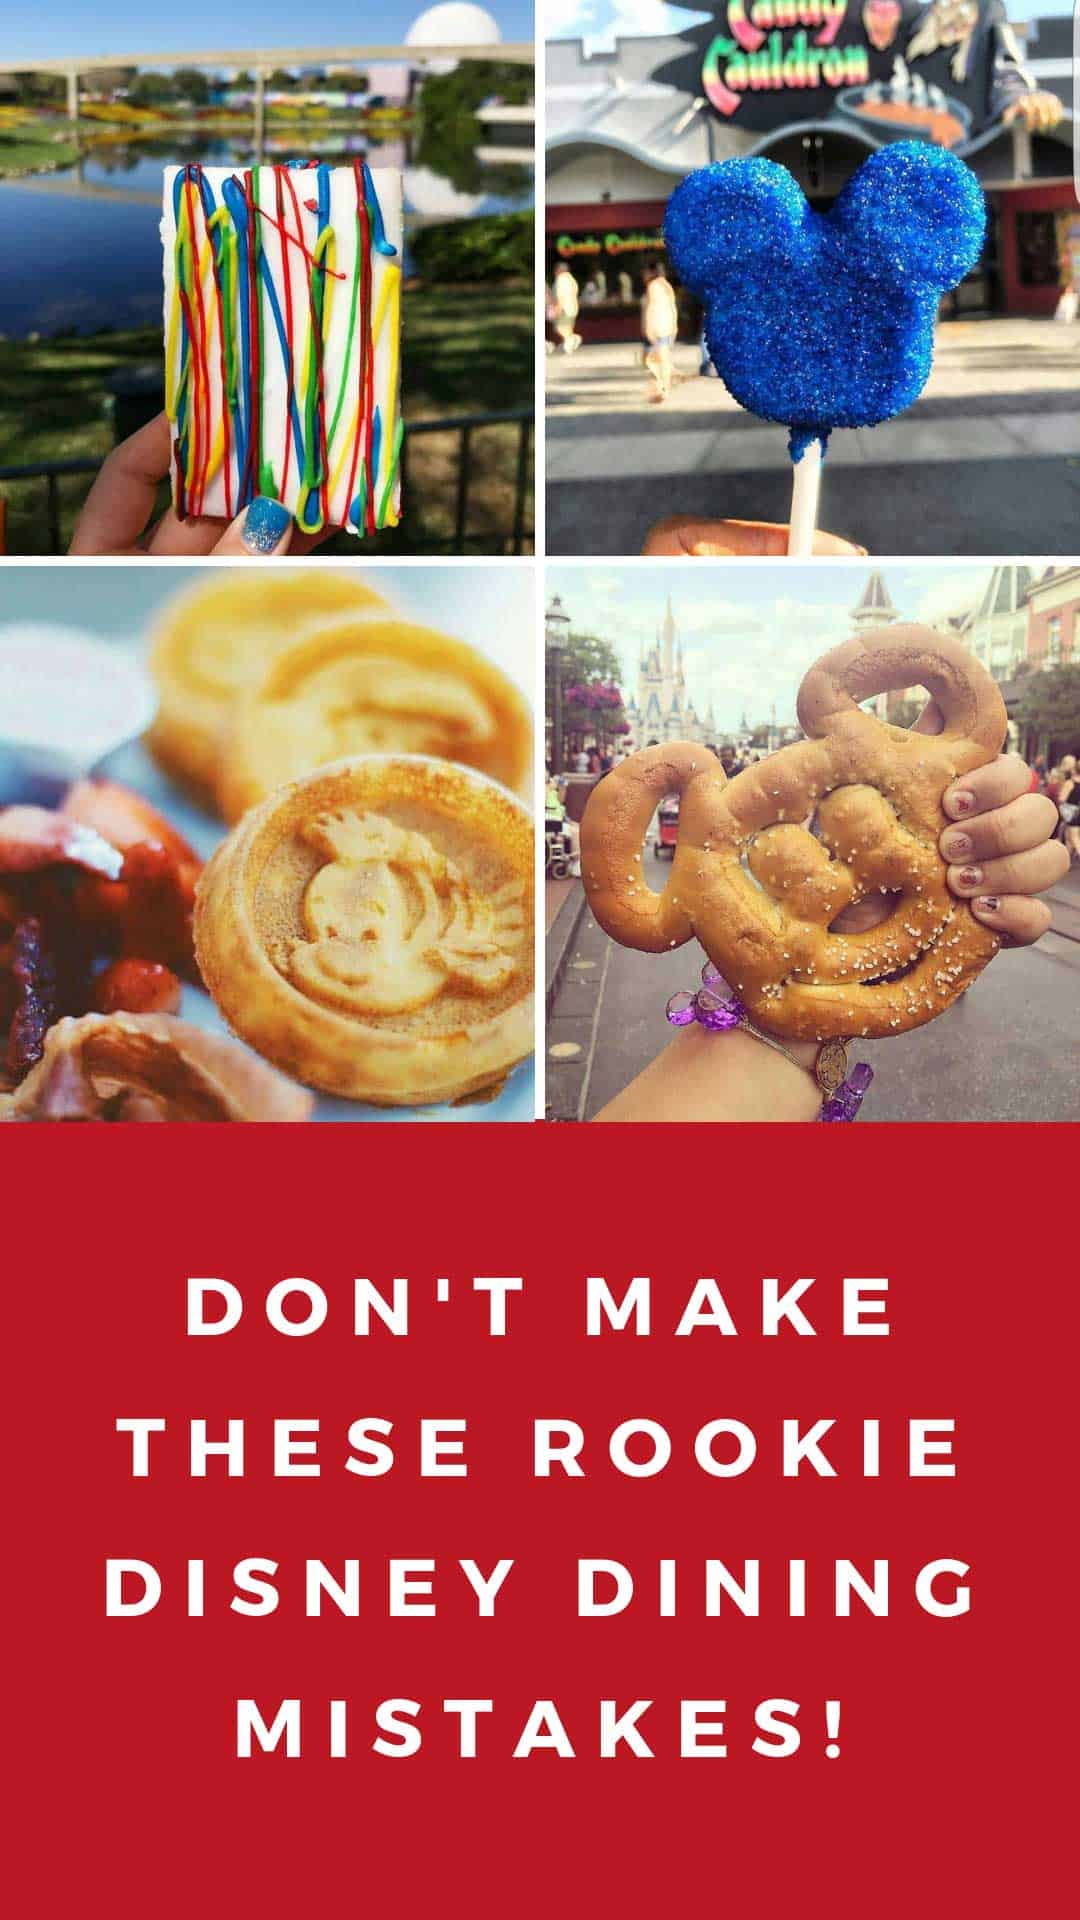 You do know you need to make your Disney dining reservations in advance right? Don't make these rookie mistakes!